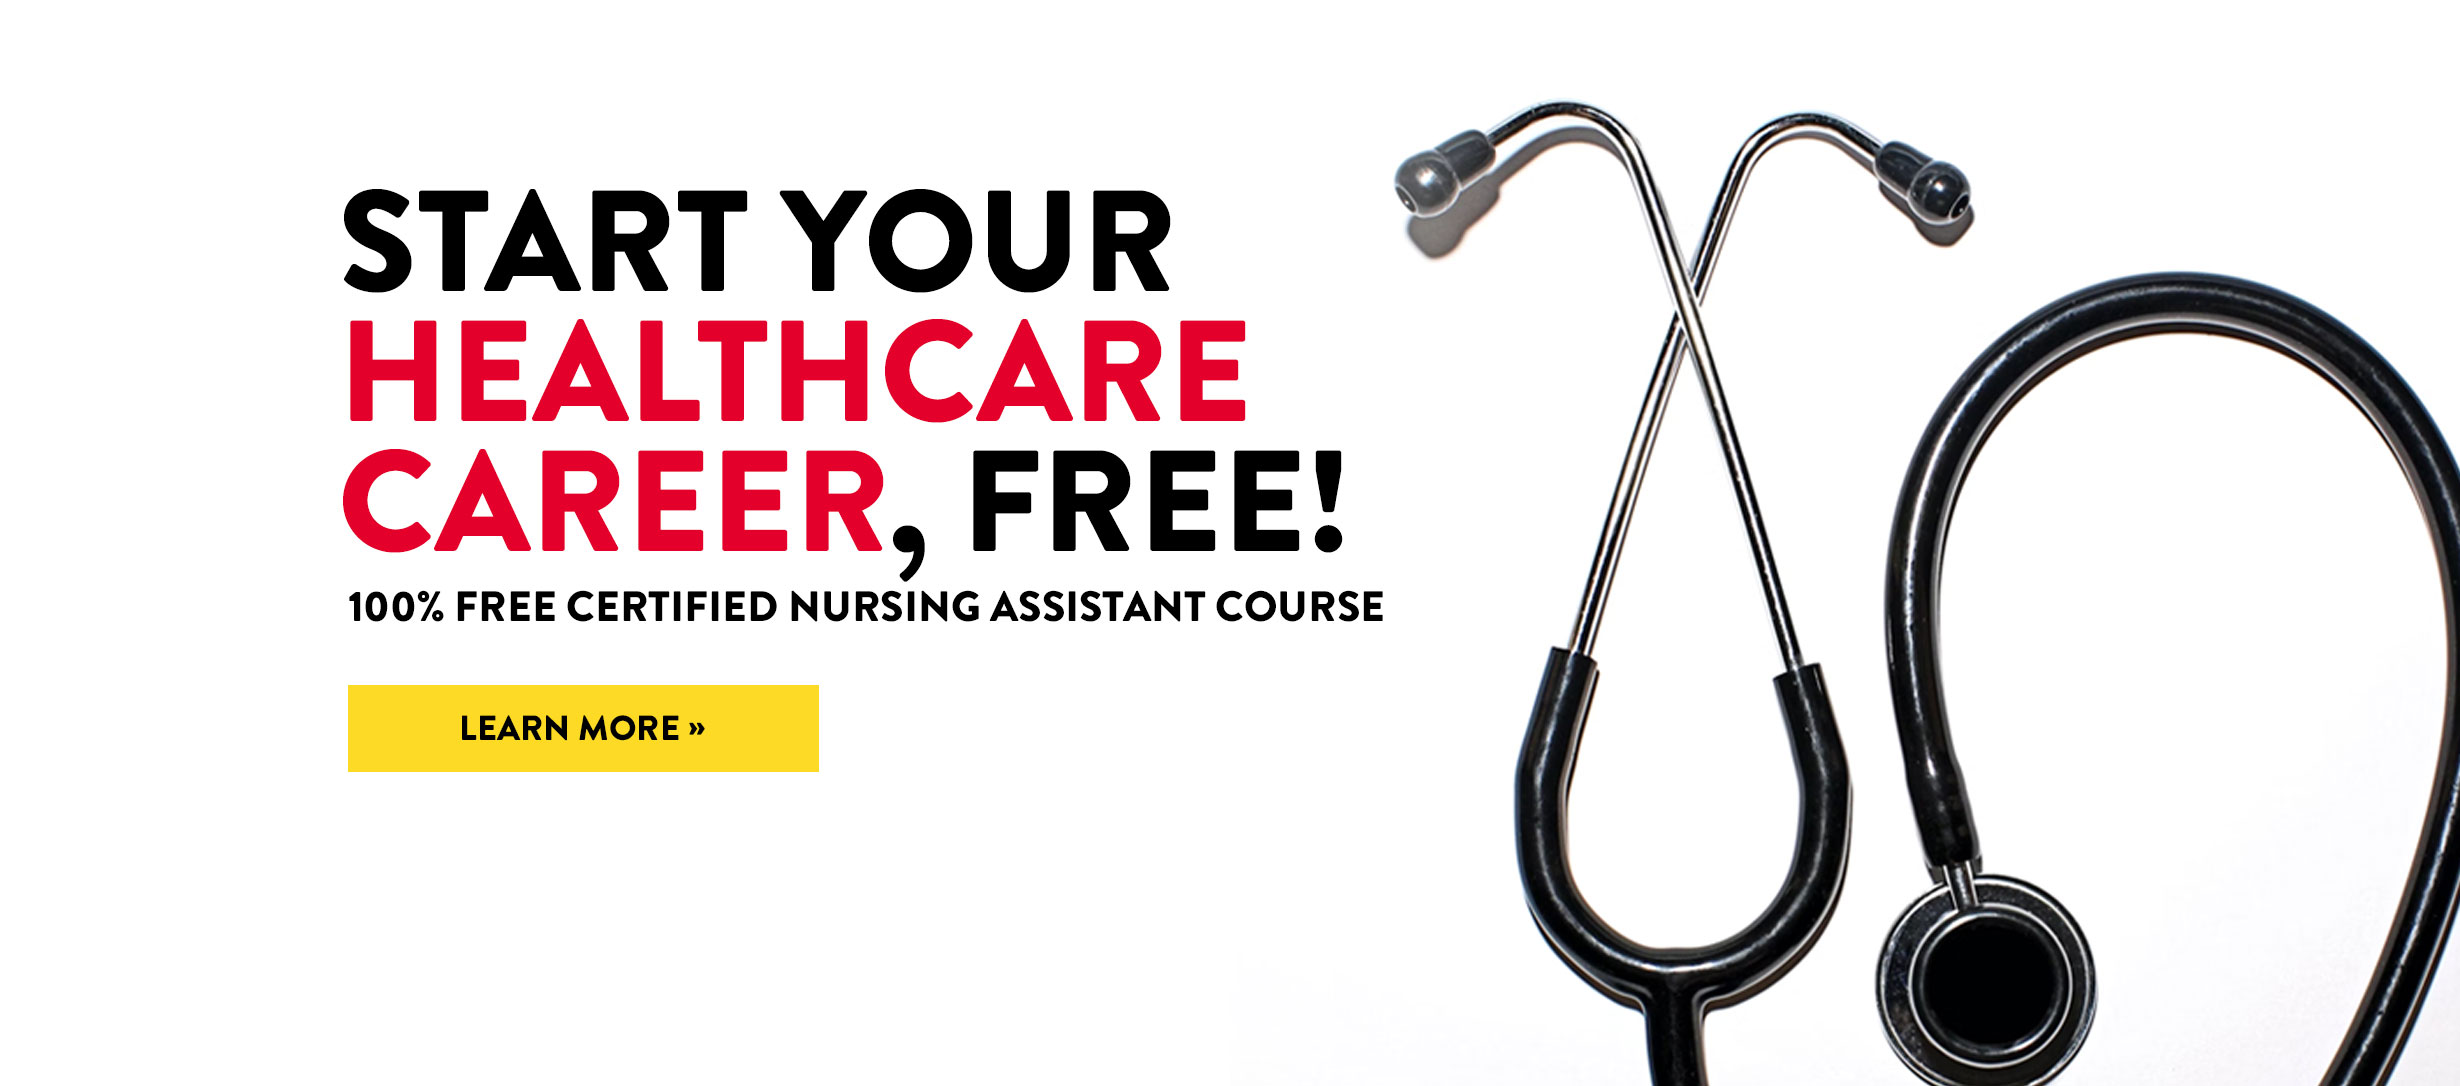 Start your Healthcare Career, Free! 100% free CNA Training available